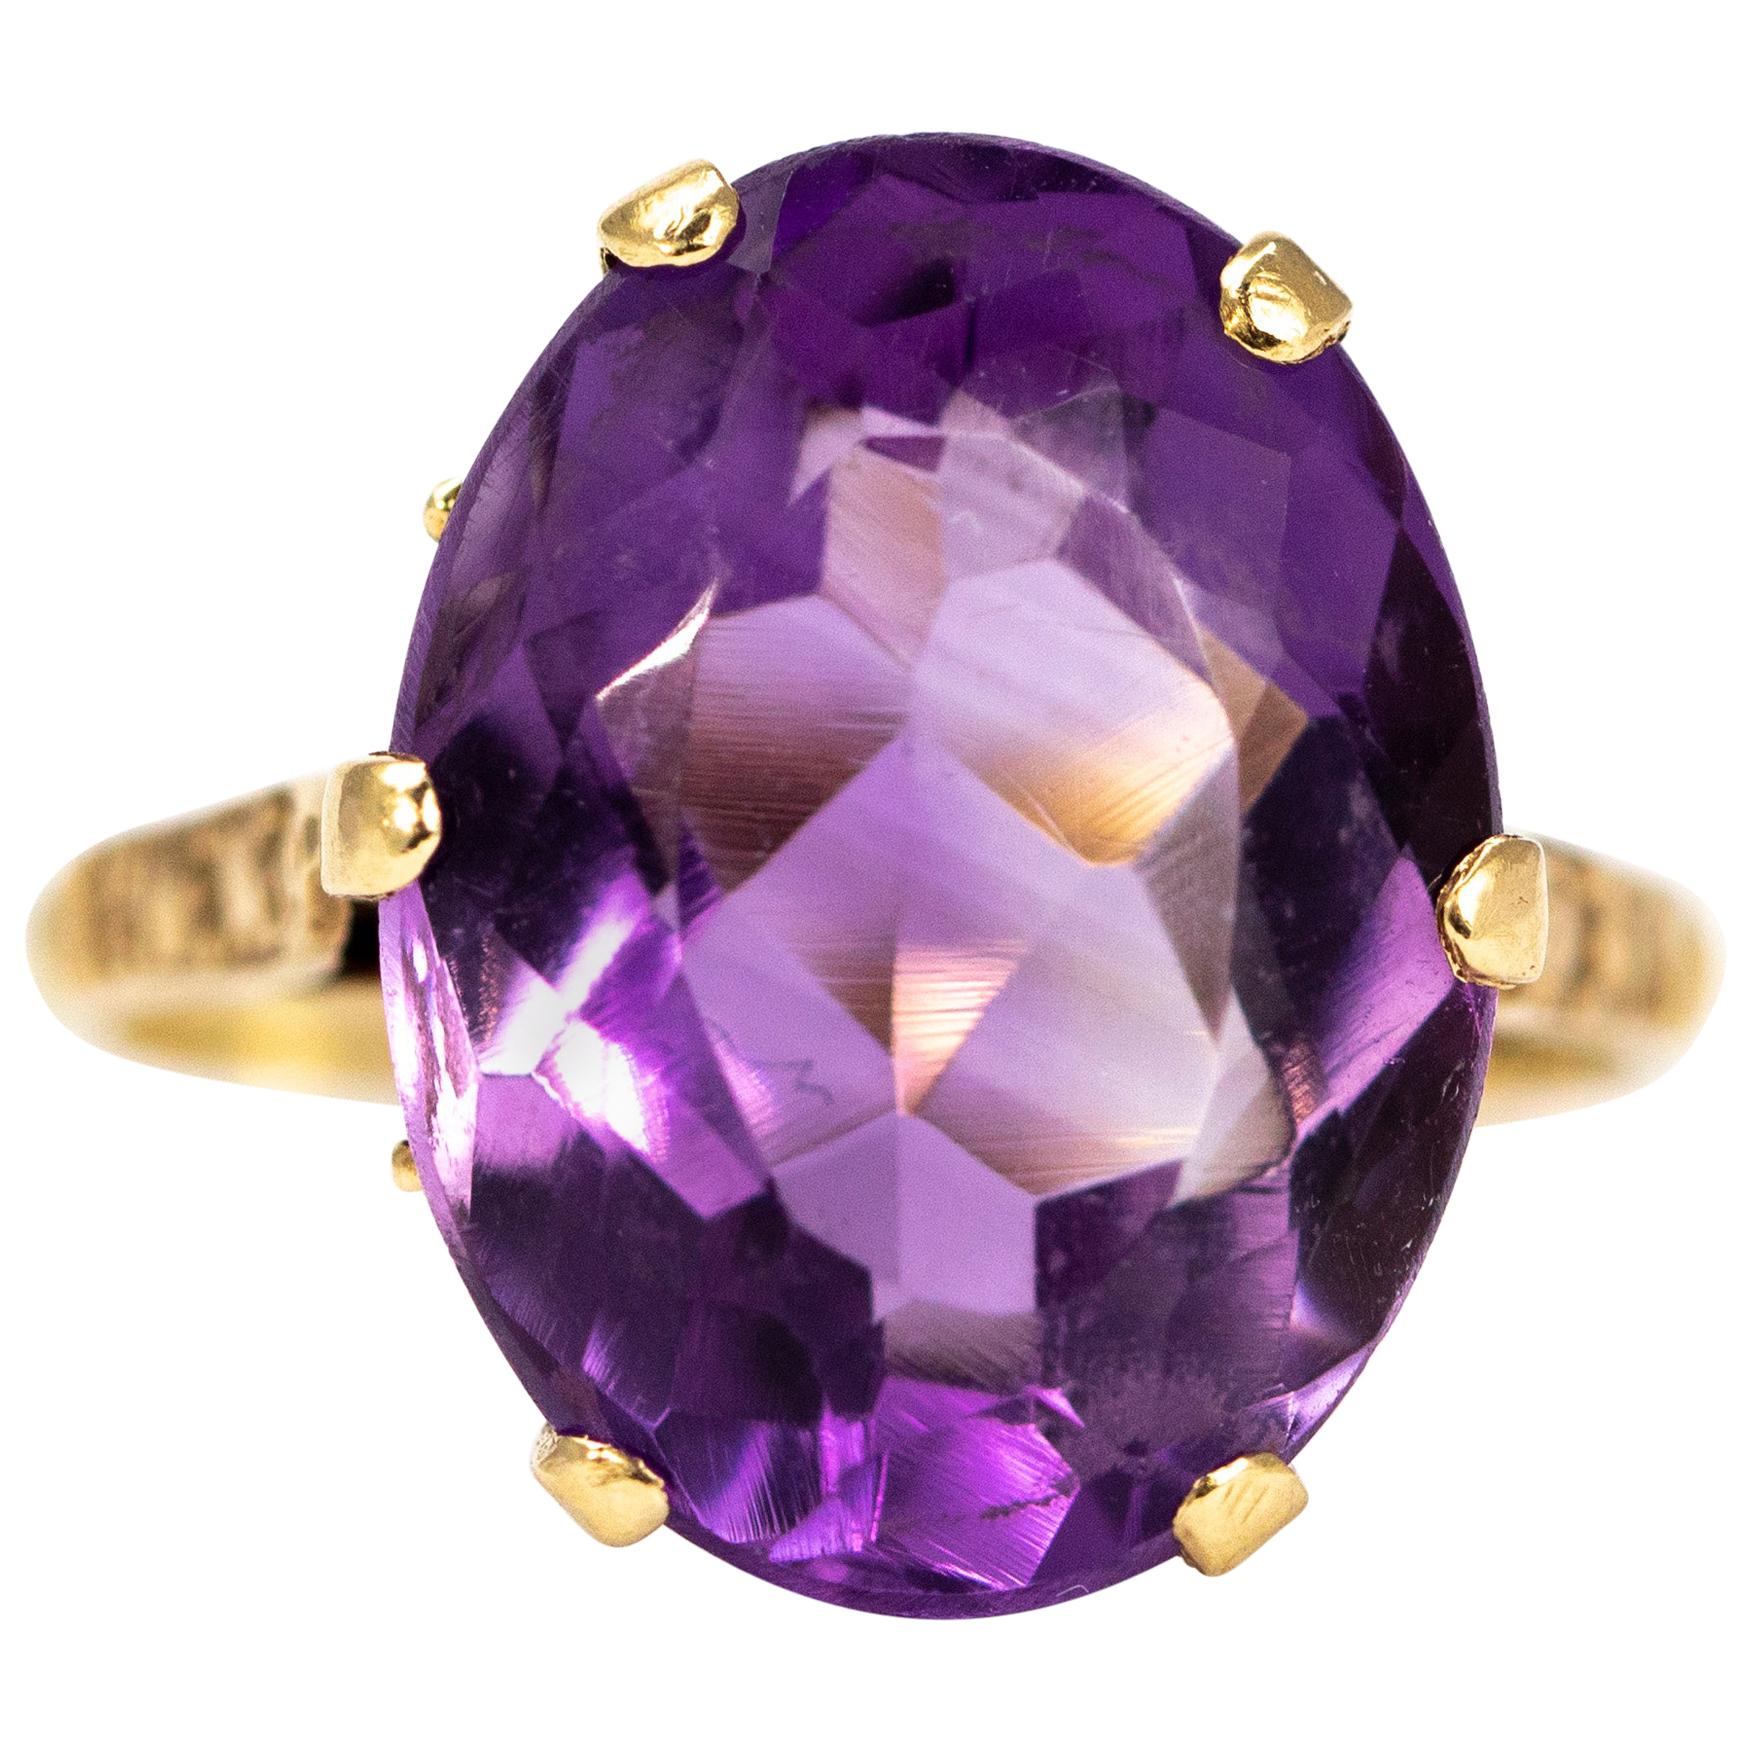 Antique Amethyst and 9 Carat Gold Cocktail Ring